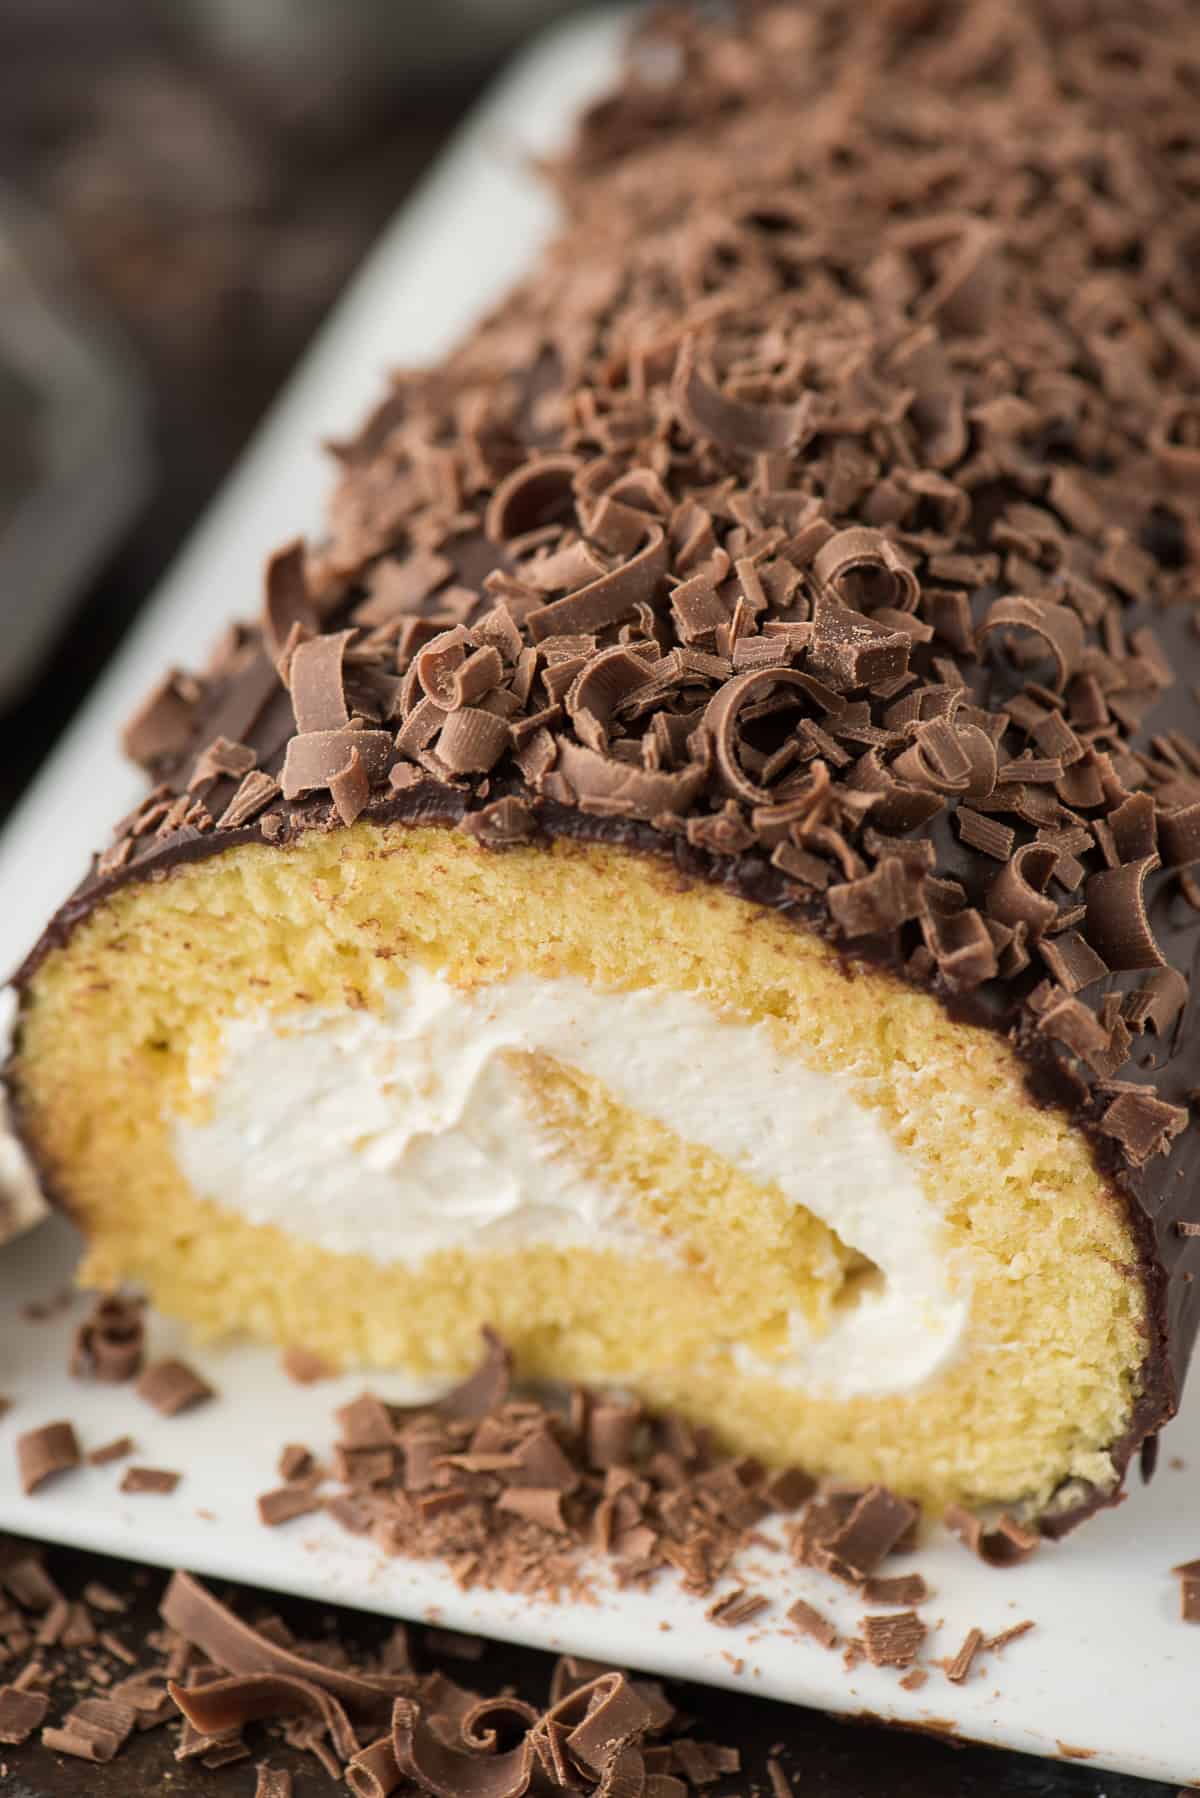 The flavor of this eggnog cake roll reminds me of Christmas! It’s a vanilla sponge cake with eggnog cream cheese filling.